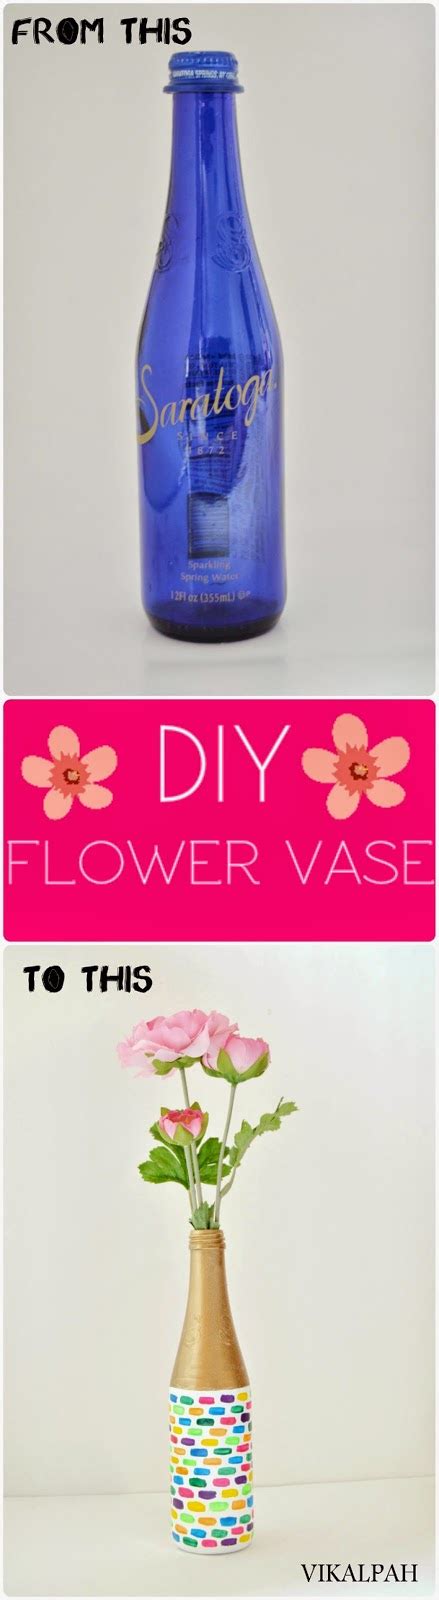 Vikalpah Diy Flower Vase At Home An Upcycle Project